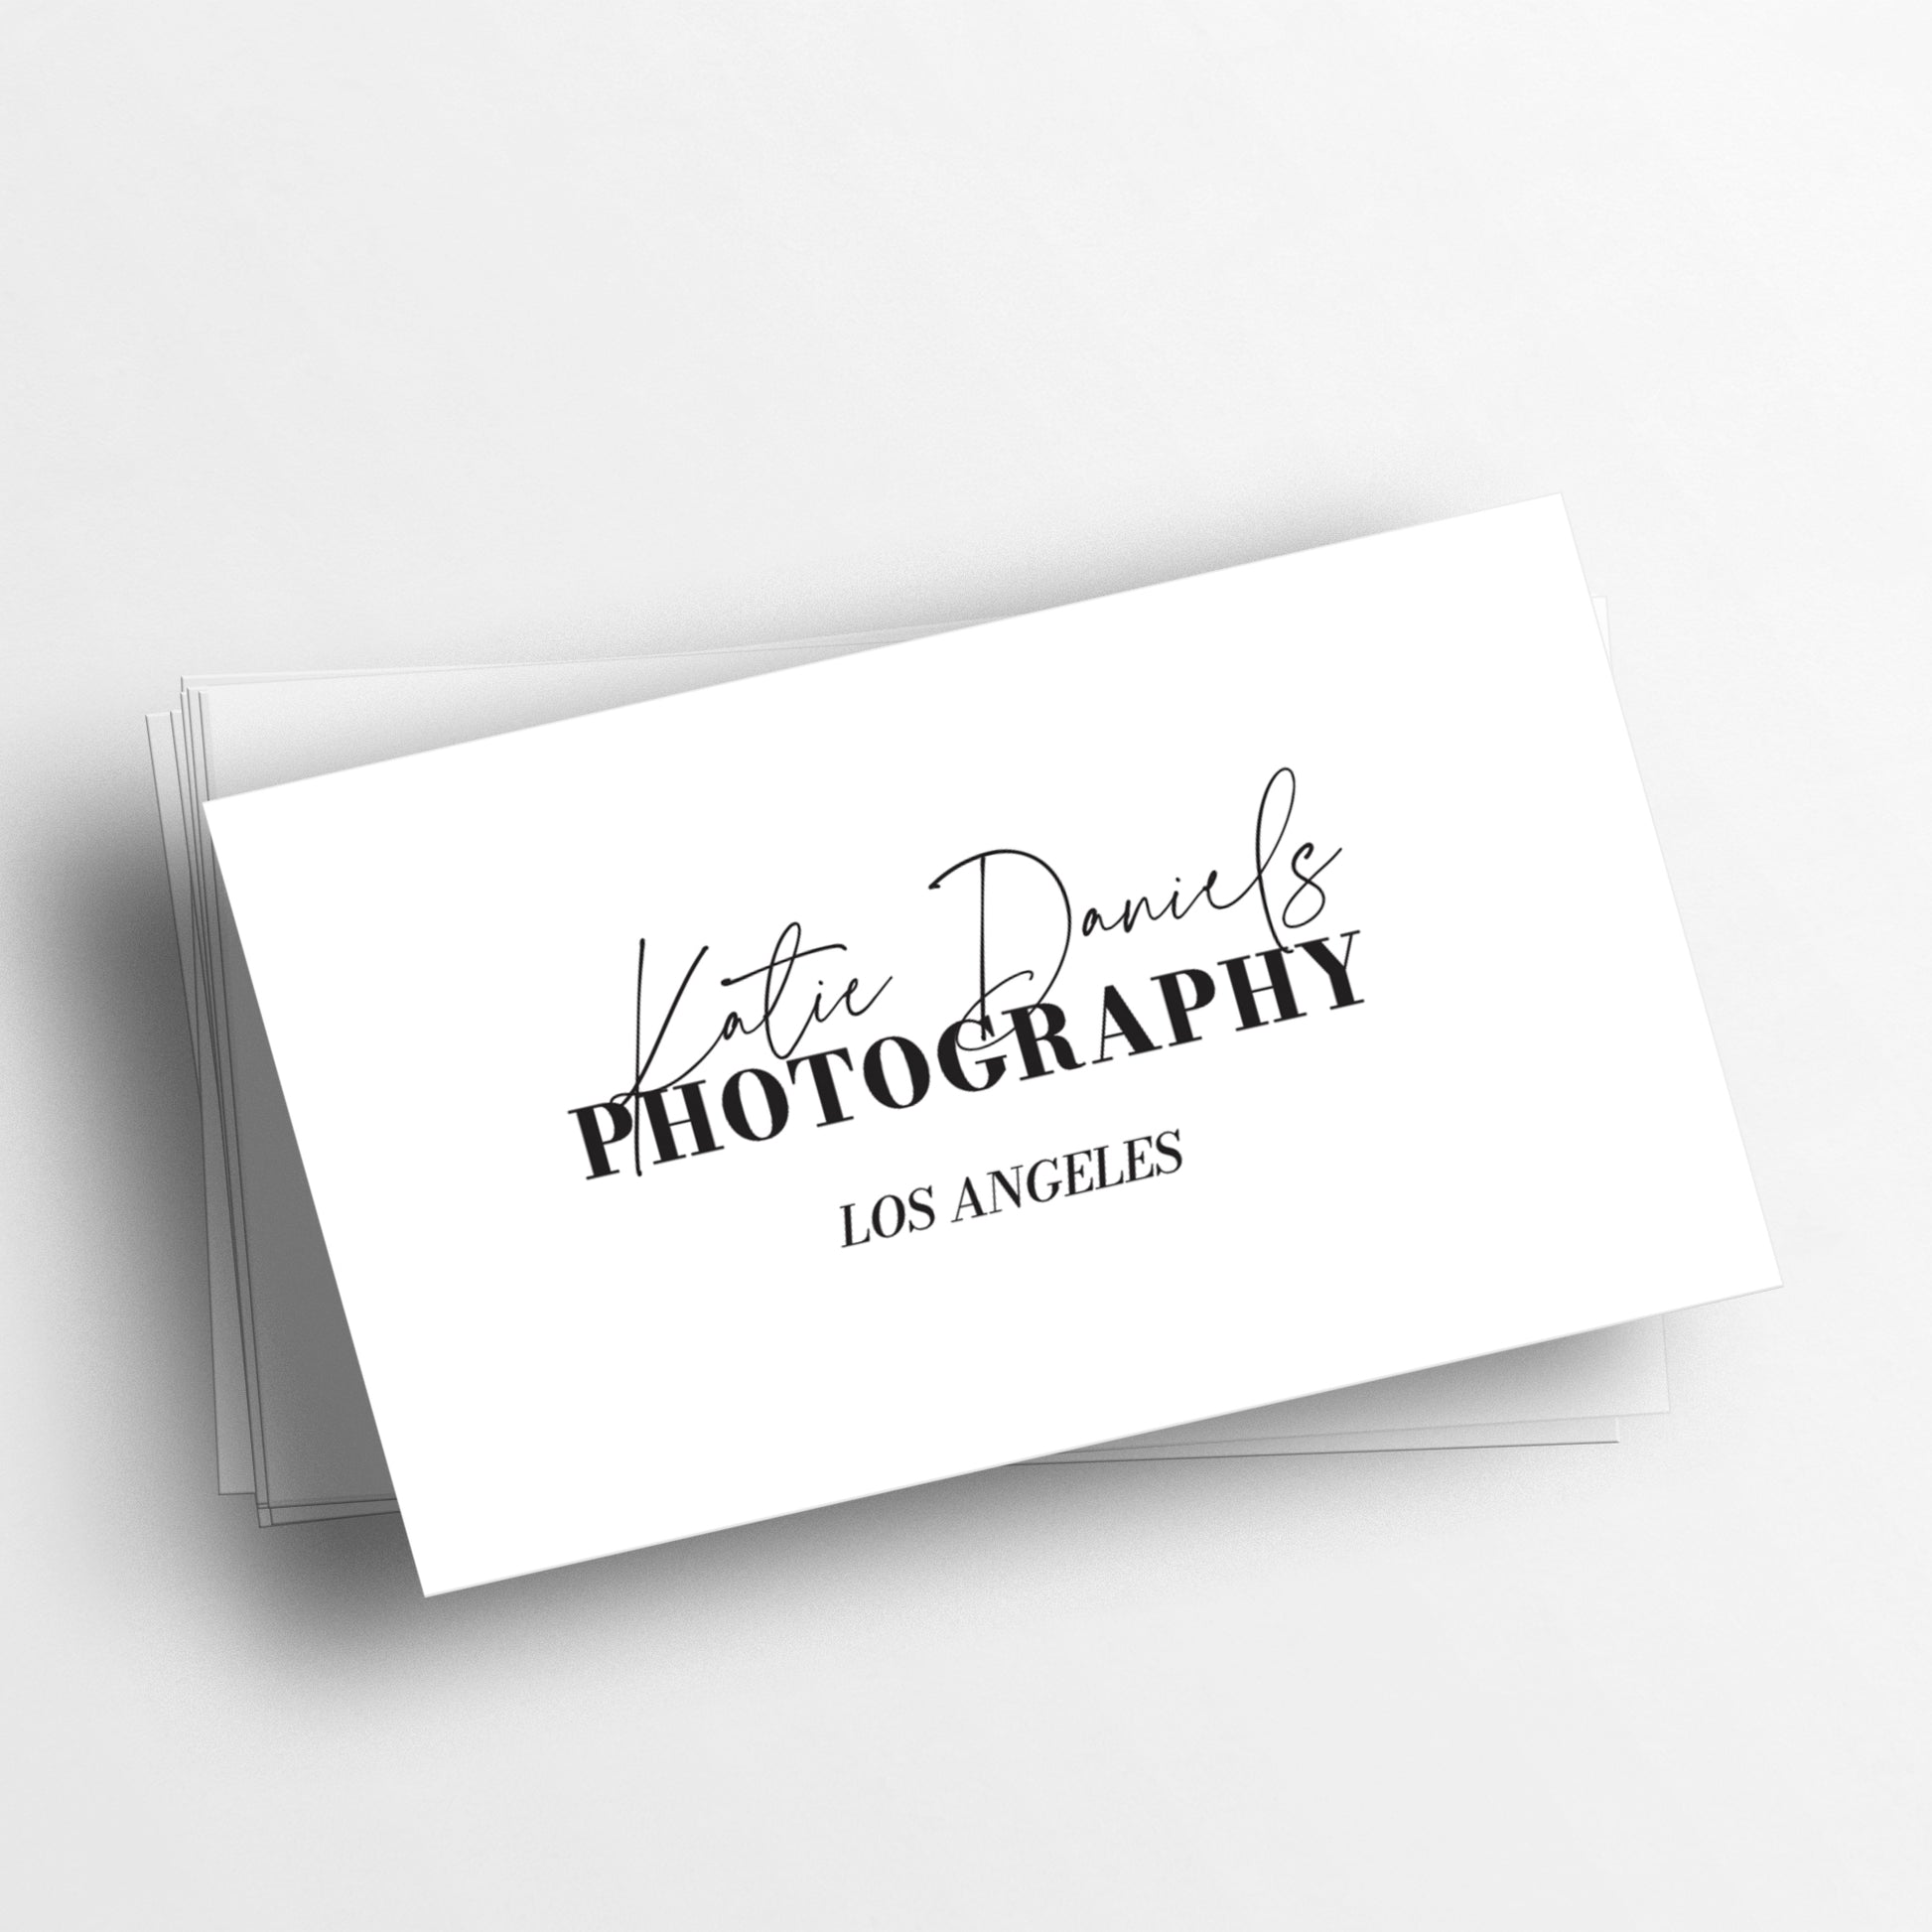 Personalized Business Cards - Sleek Black and White Design with Unique Fonts - XOXOKristen